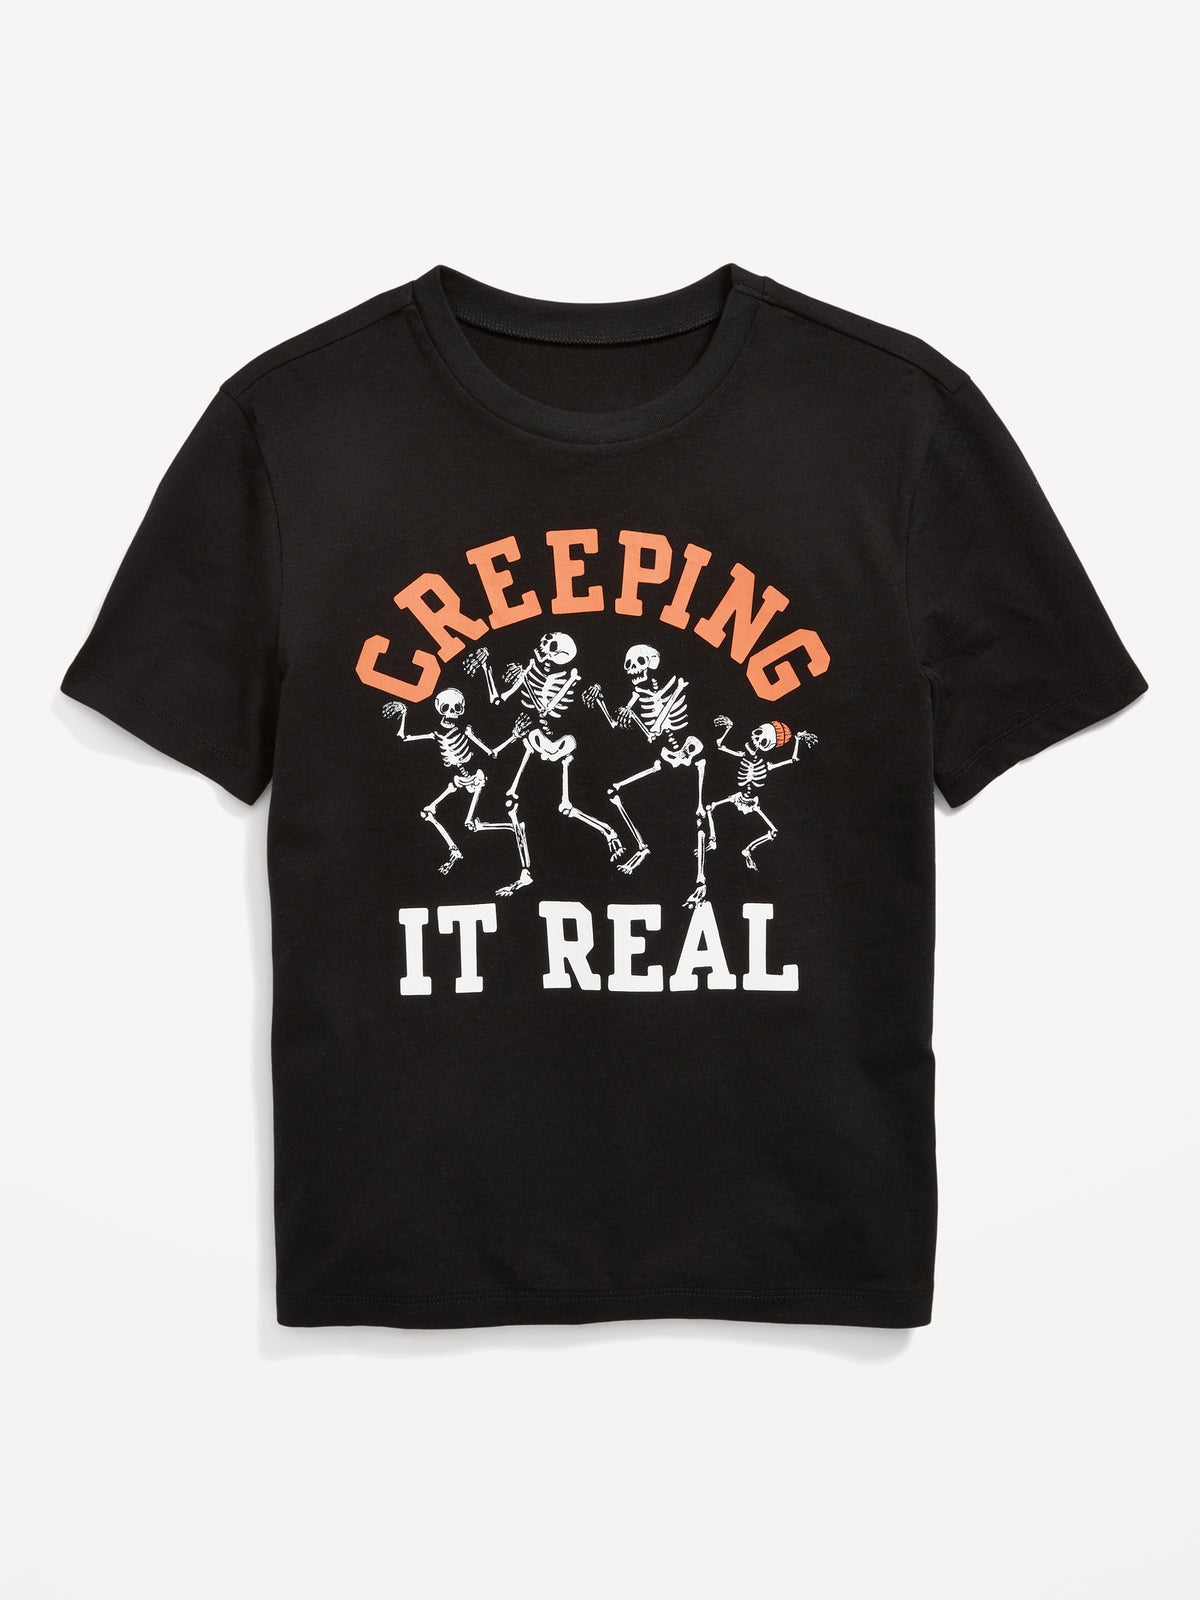 Matching Halloween Graphic T-Shirts for Boys